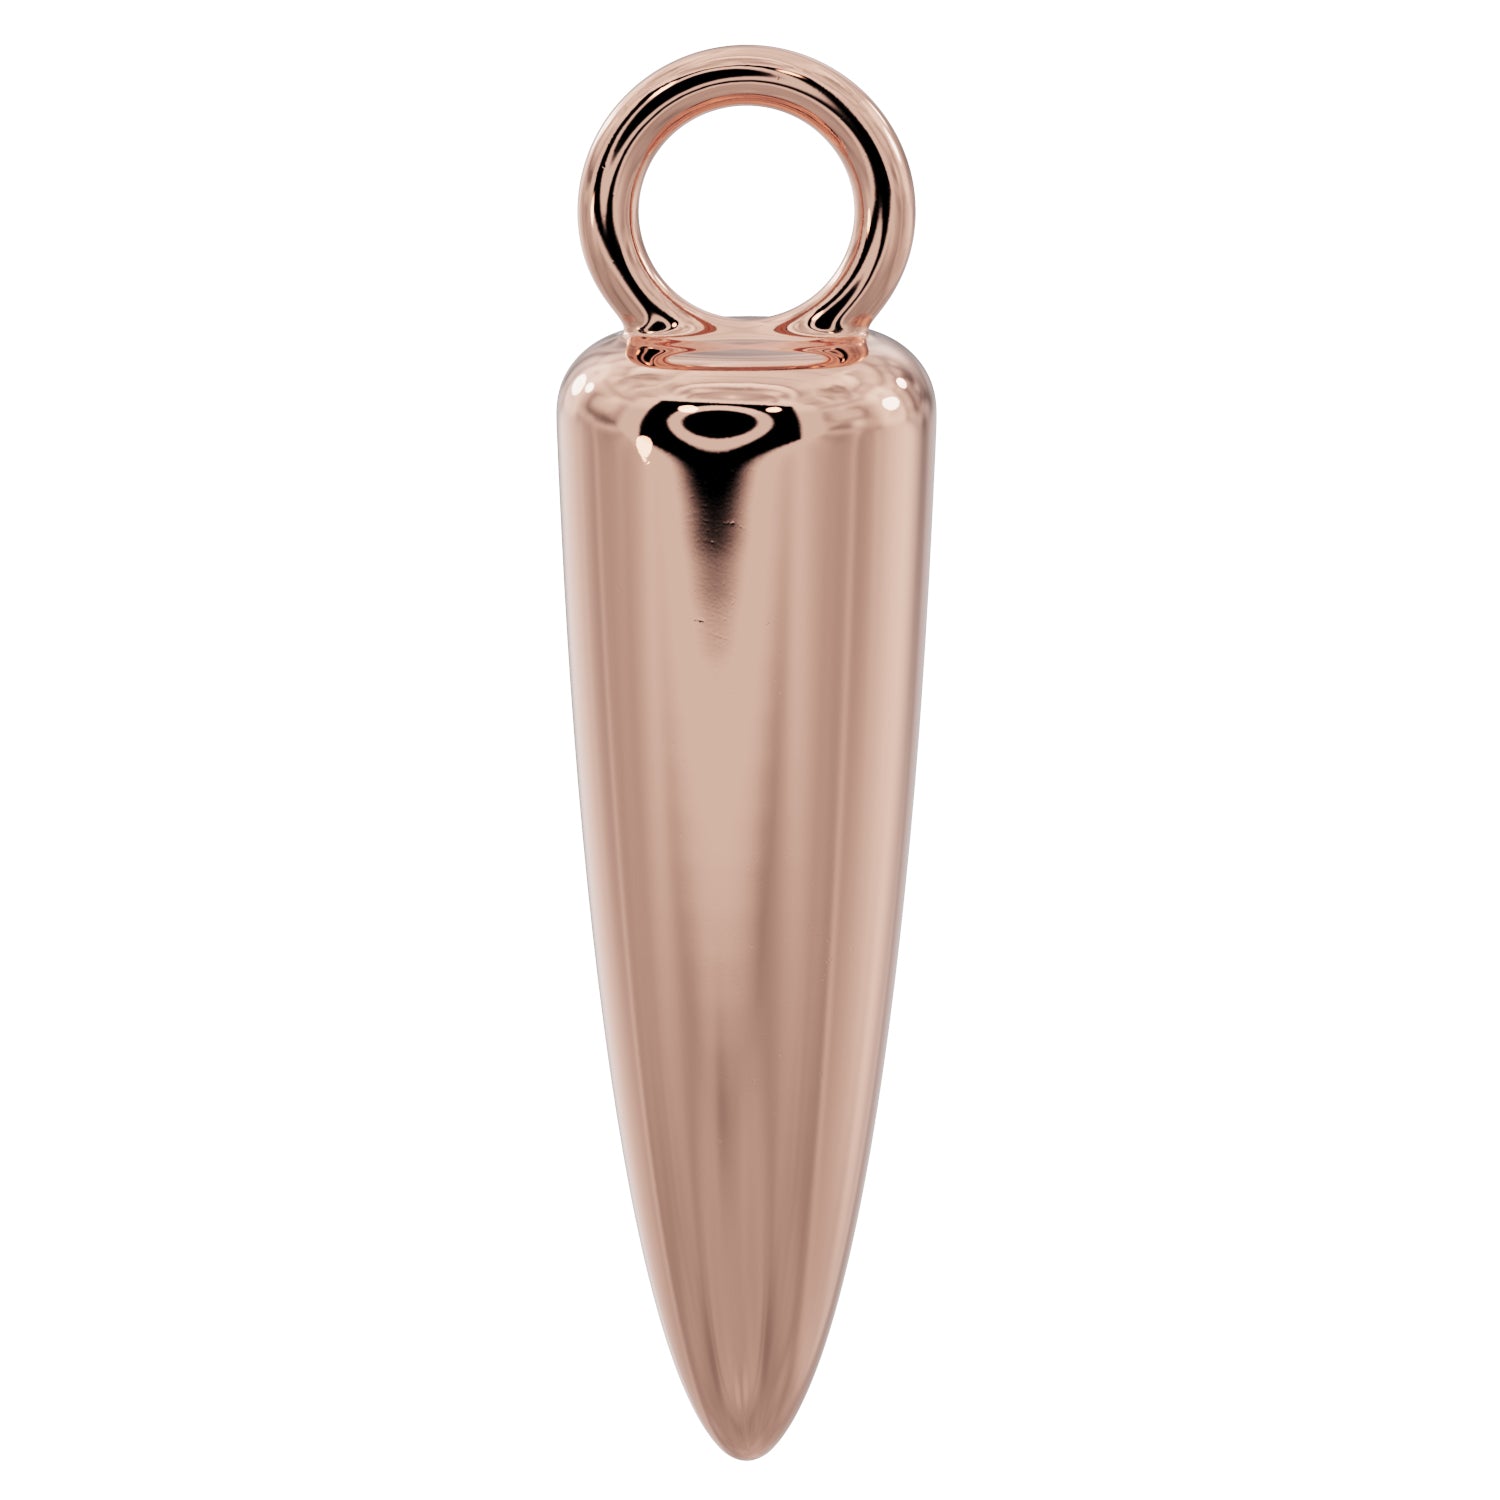 Long Spike Charm Accessory for Piercing Jewelry-14K Rose Gold